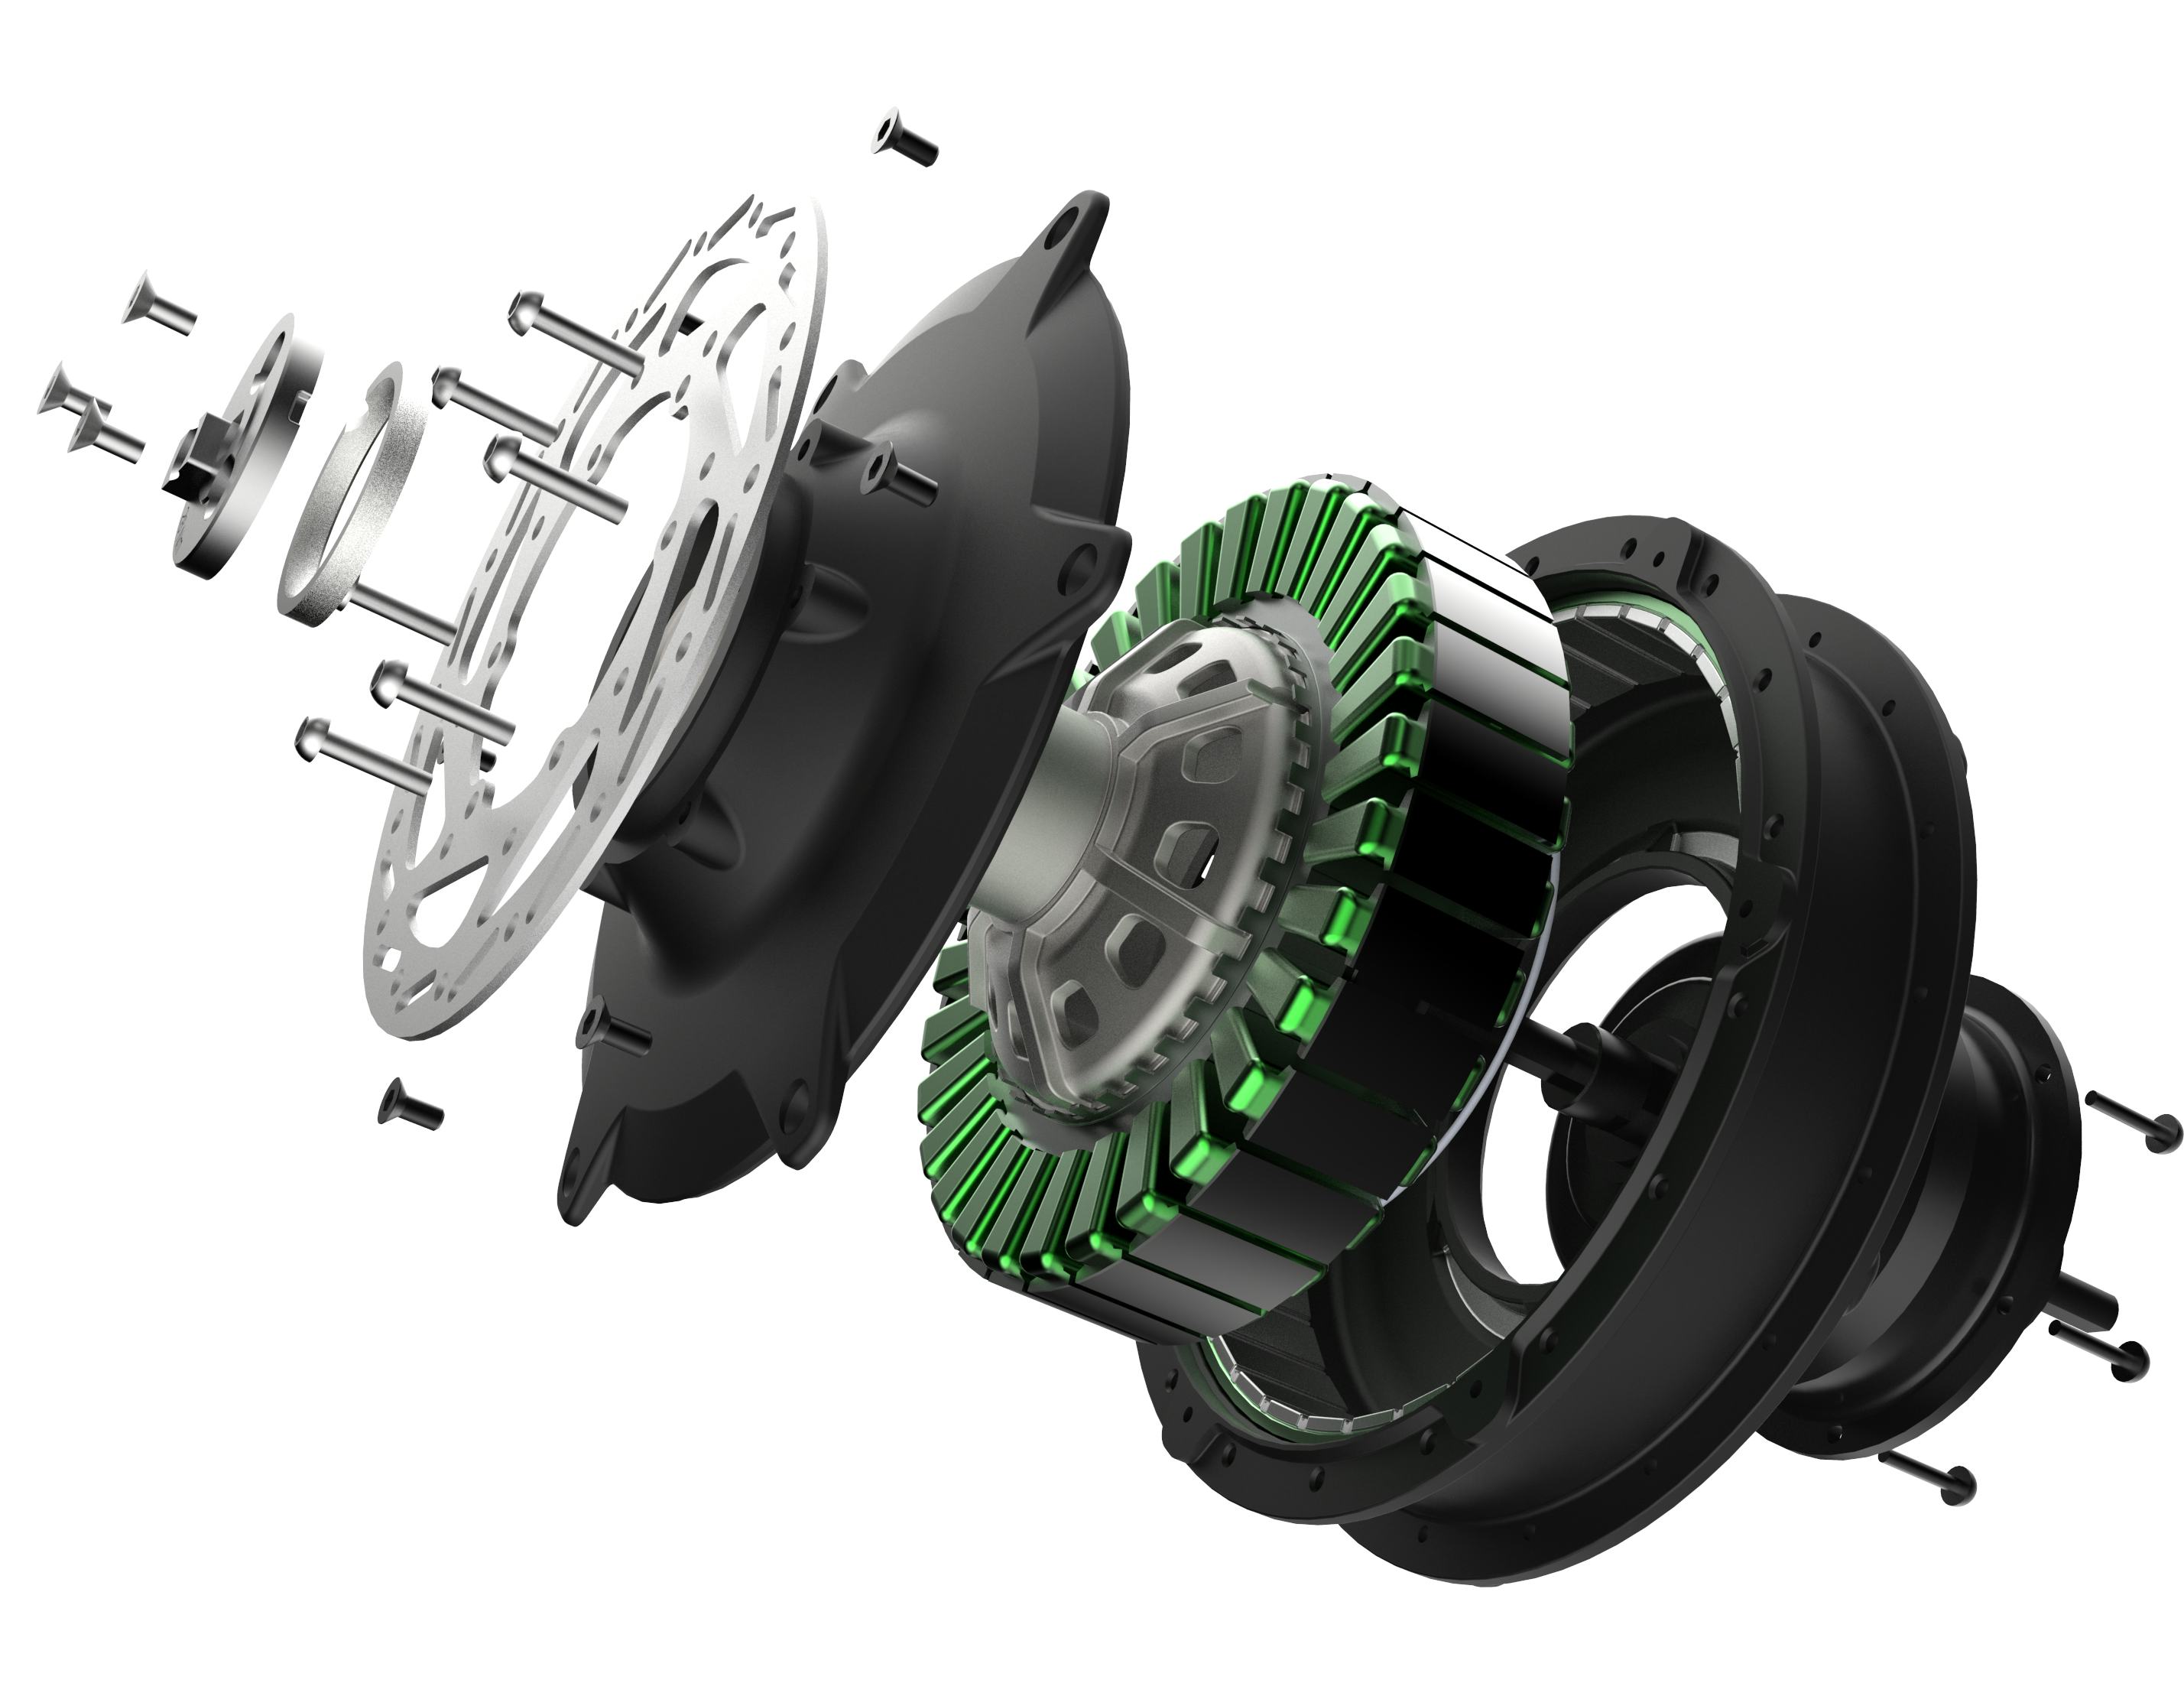 Accell Launches E-Bike Motor with Integrated 5-Speed Gear Hub